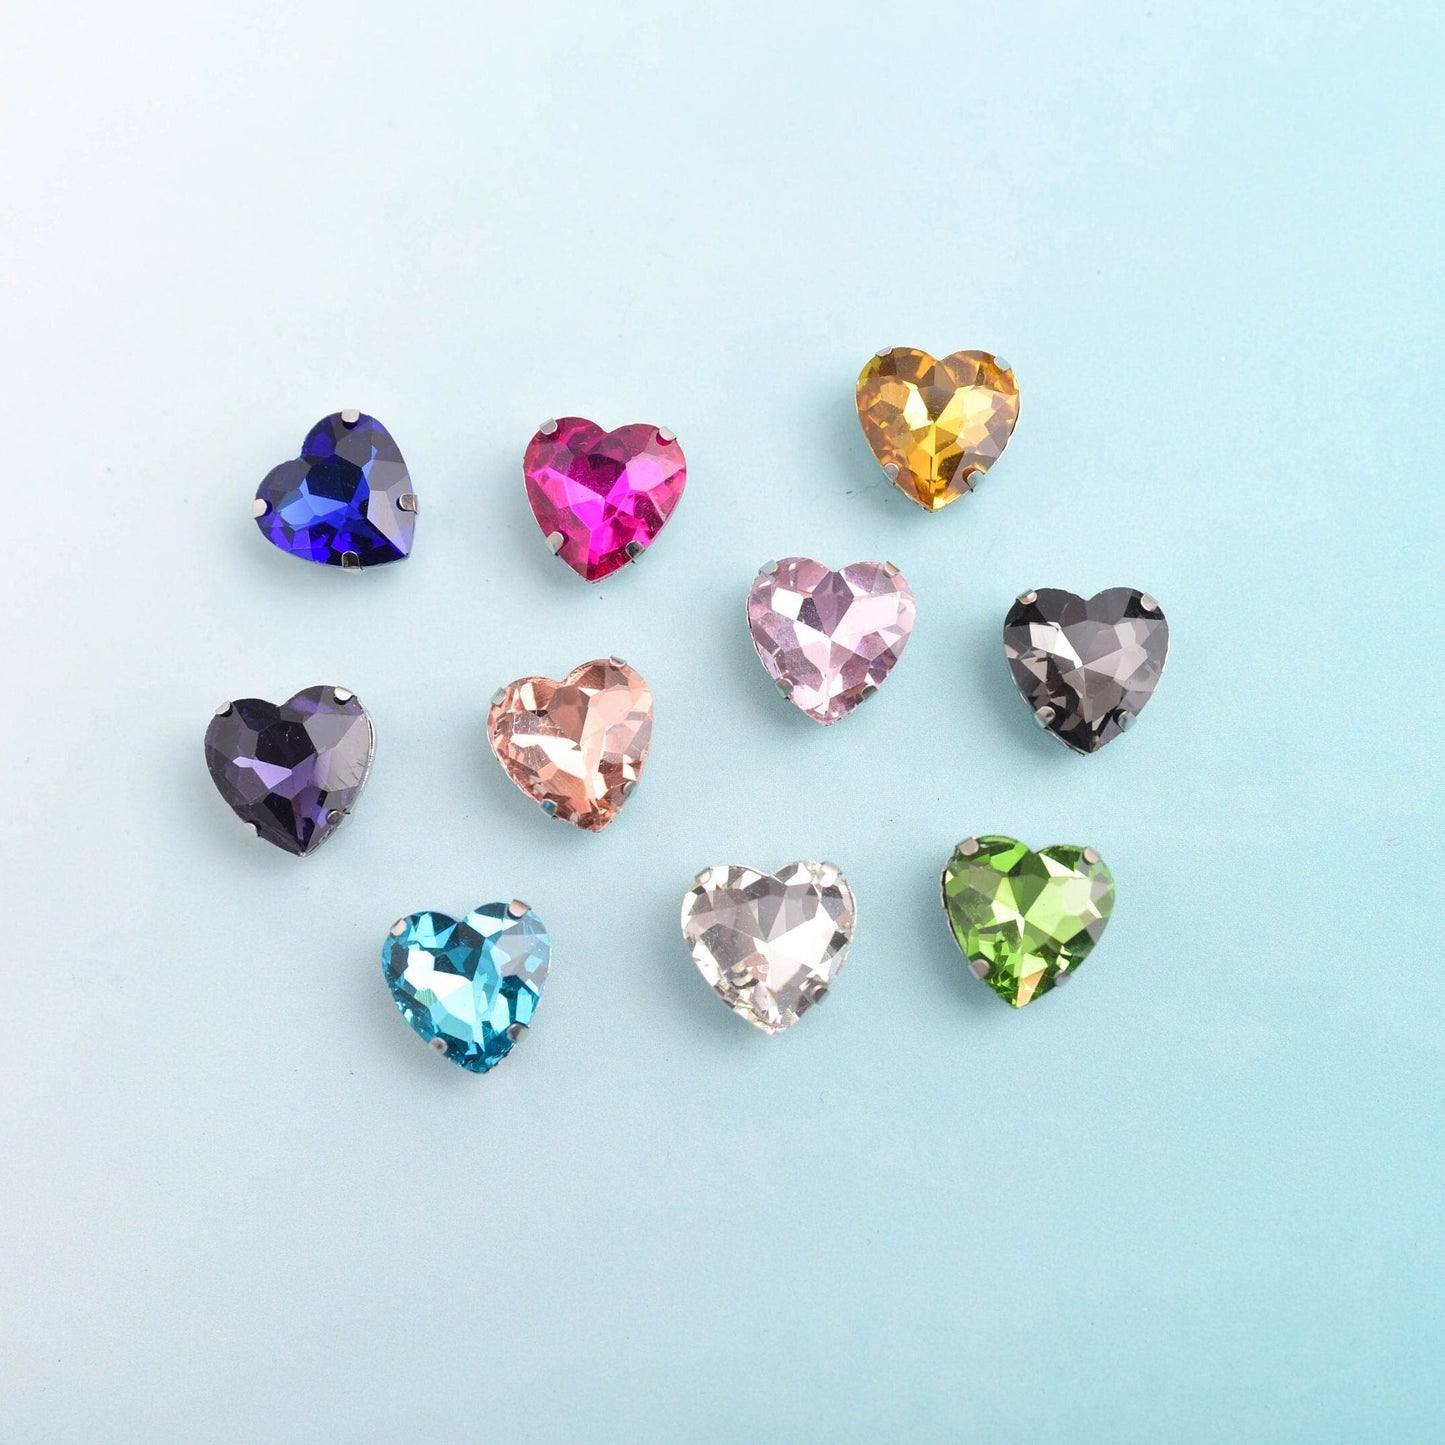 Heart Jewel Magnets or Push Pins- Set of 10